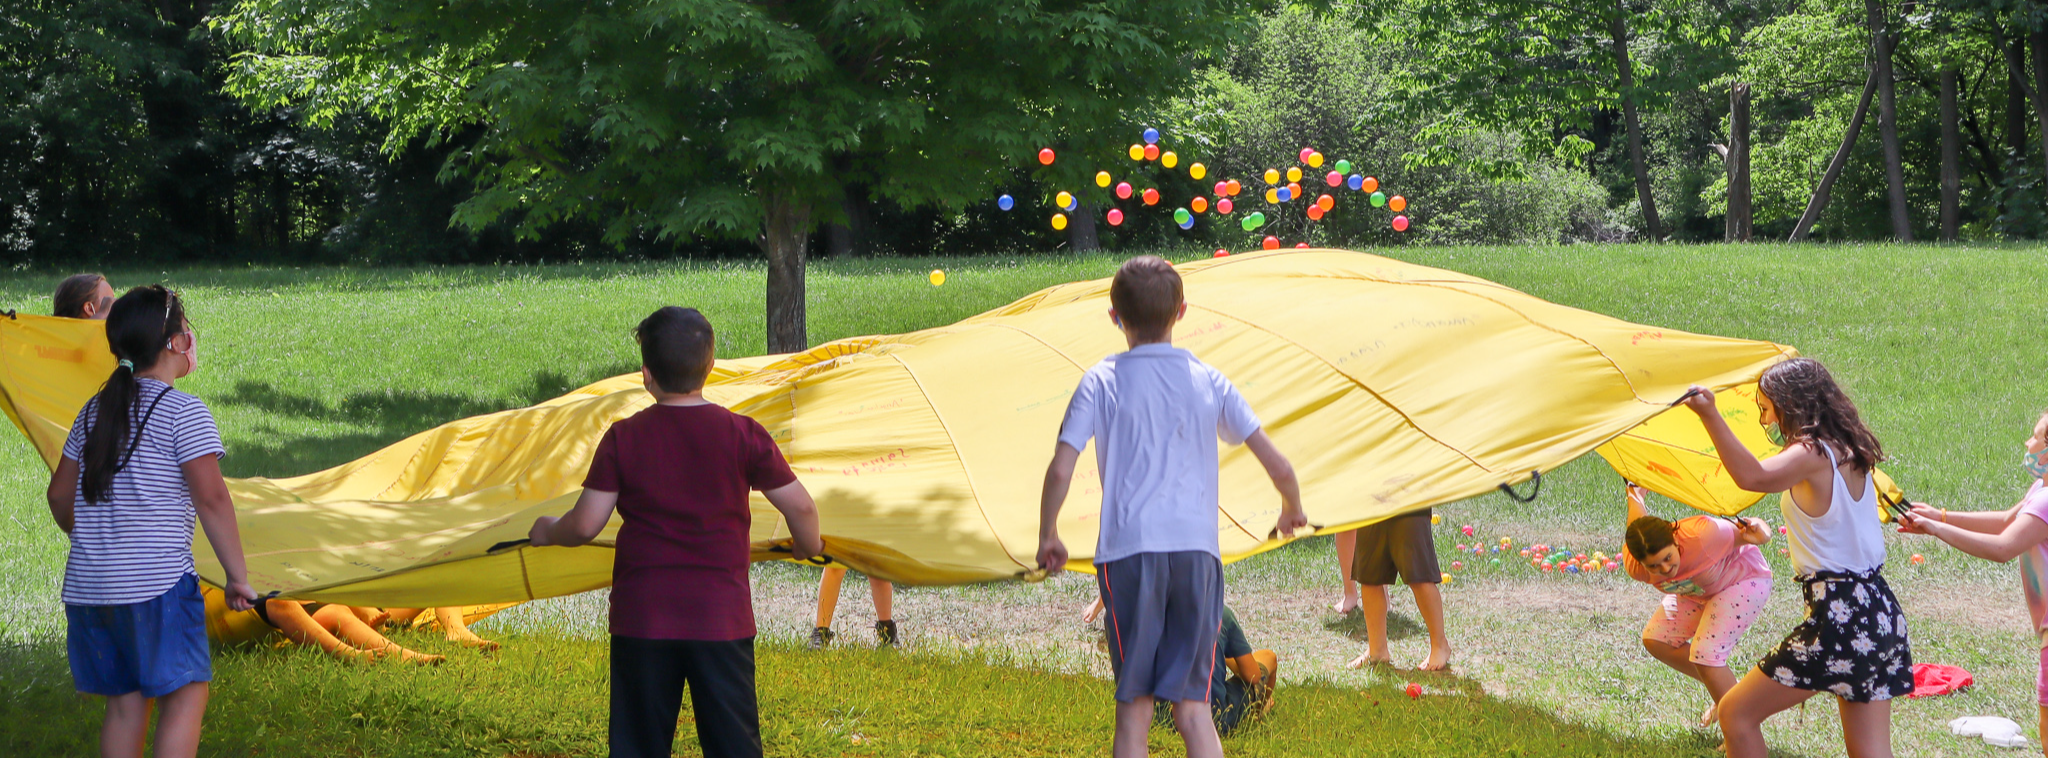 Students playing parachute outside